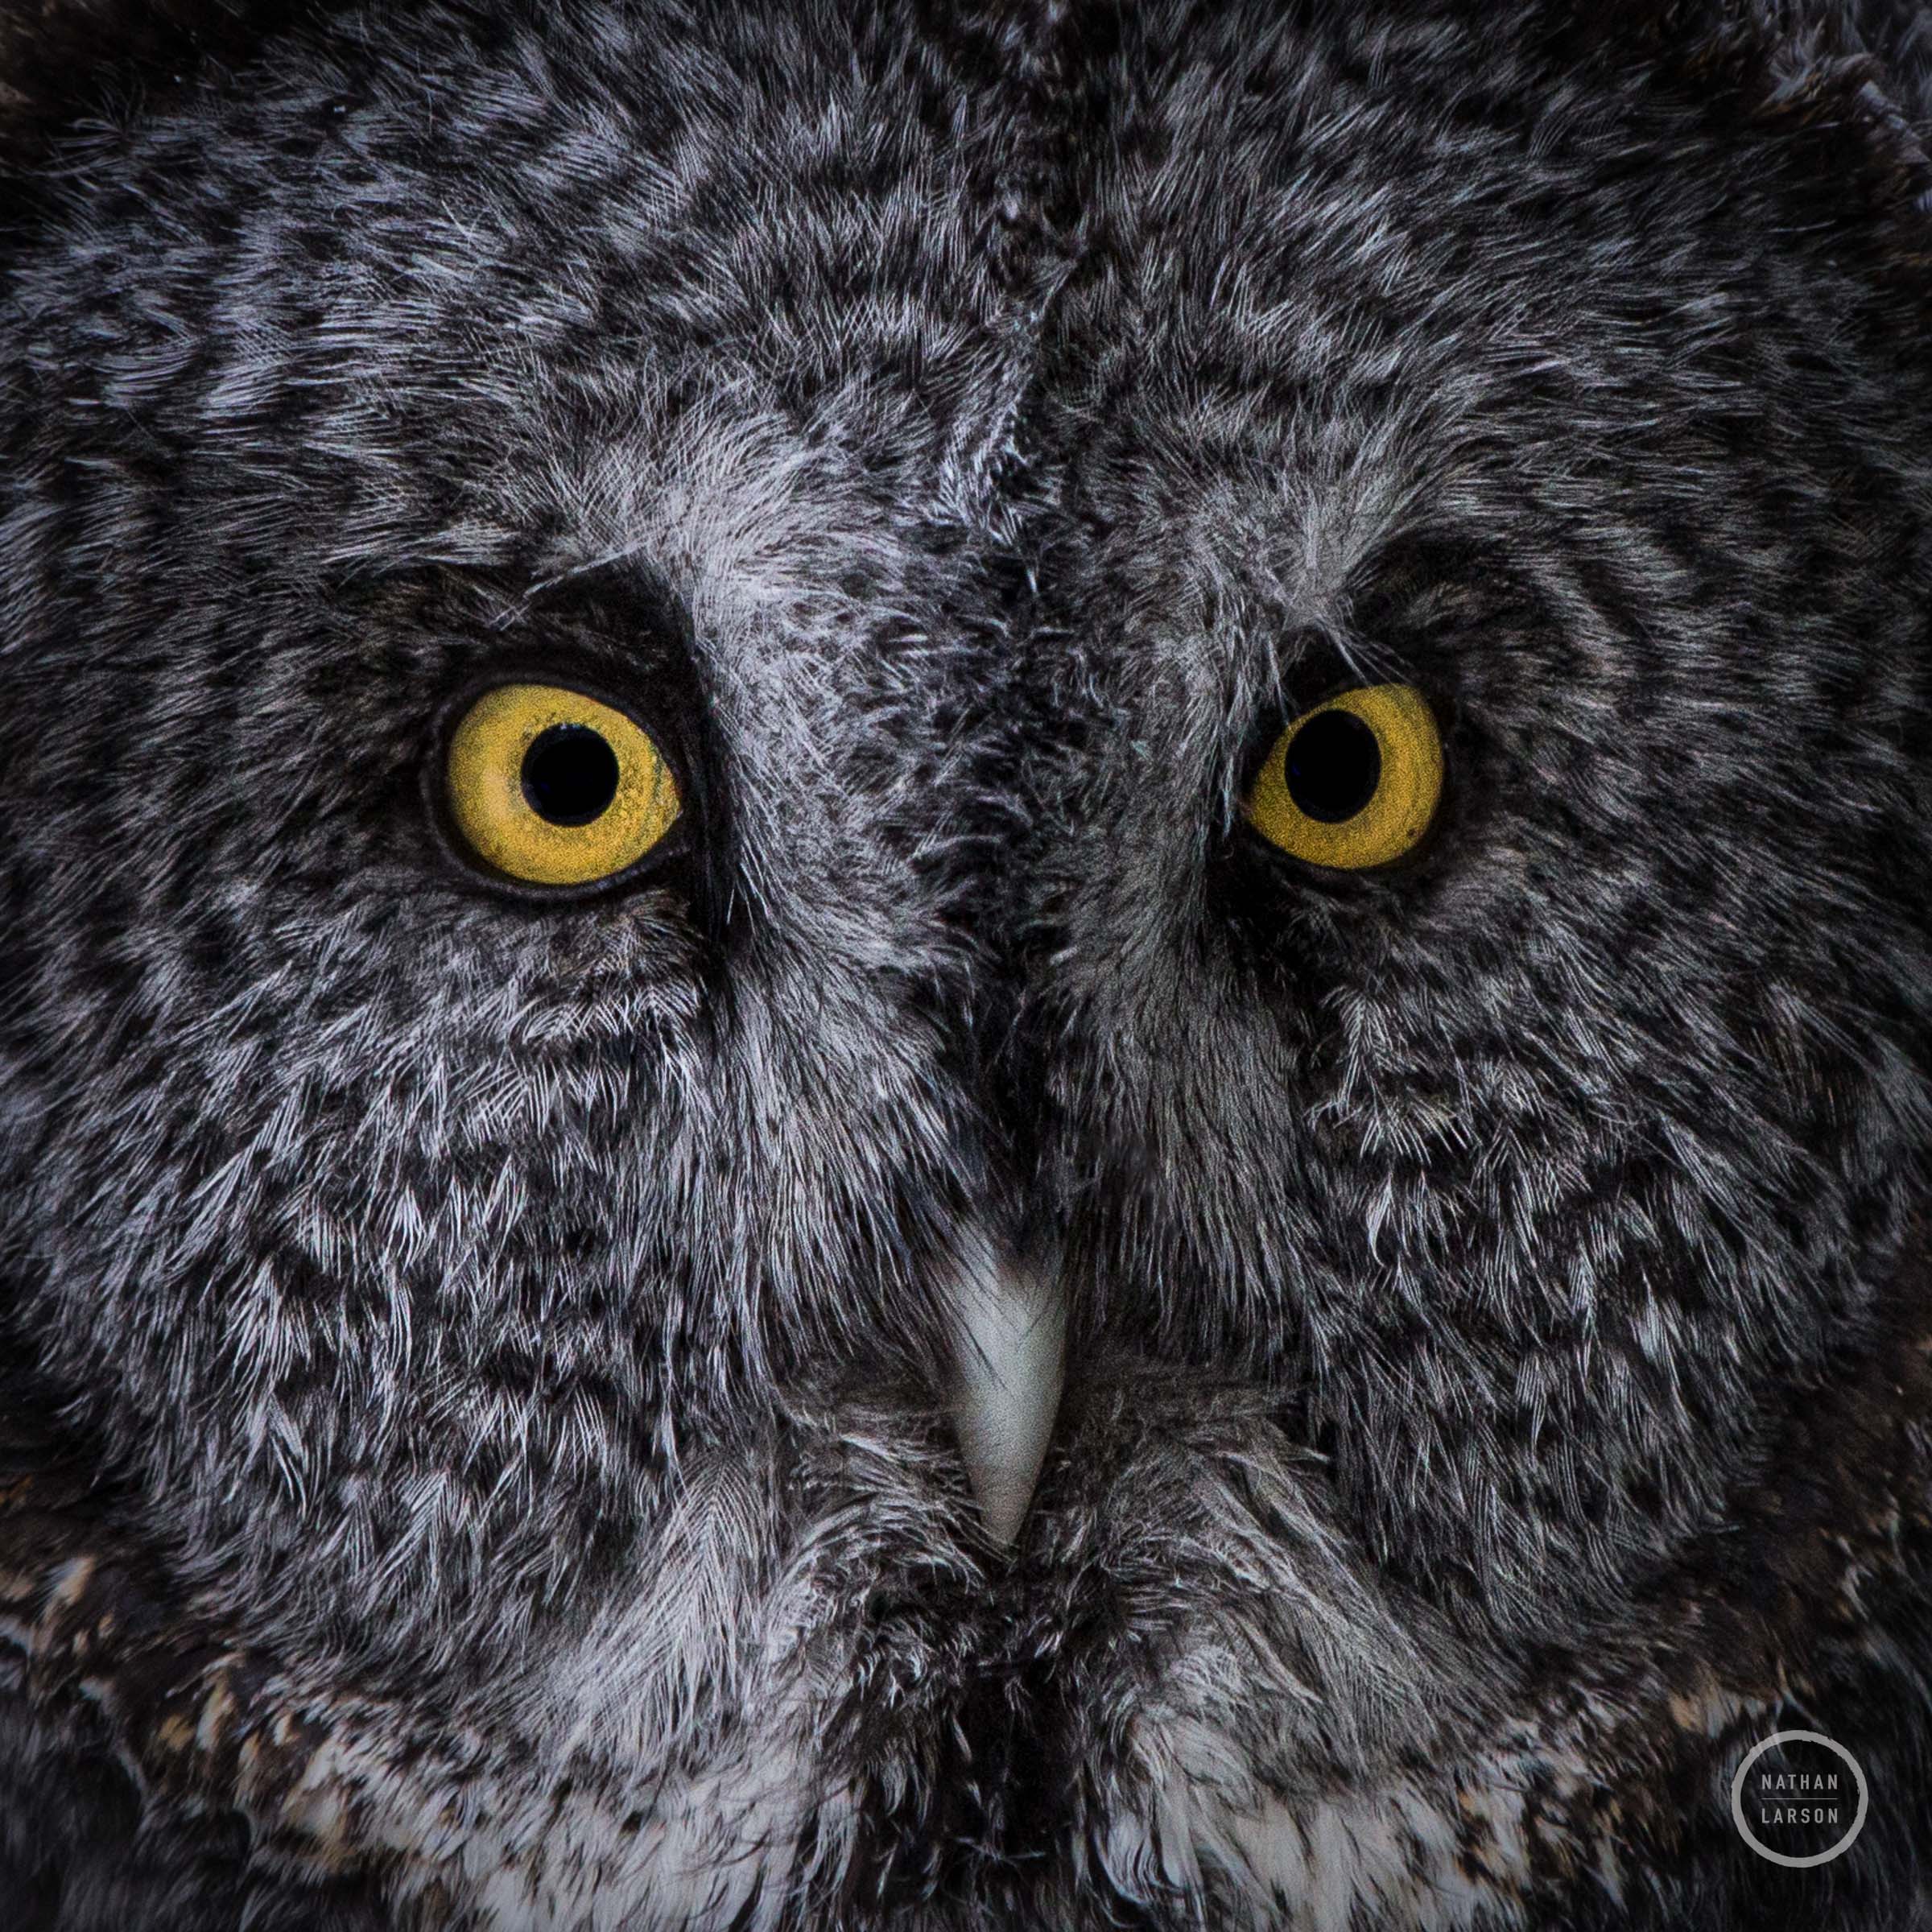 Venture into the enigmatic world of the forest with this captivating fine art print, featuring a close-up of a Great Grey Owl...